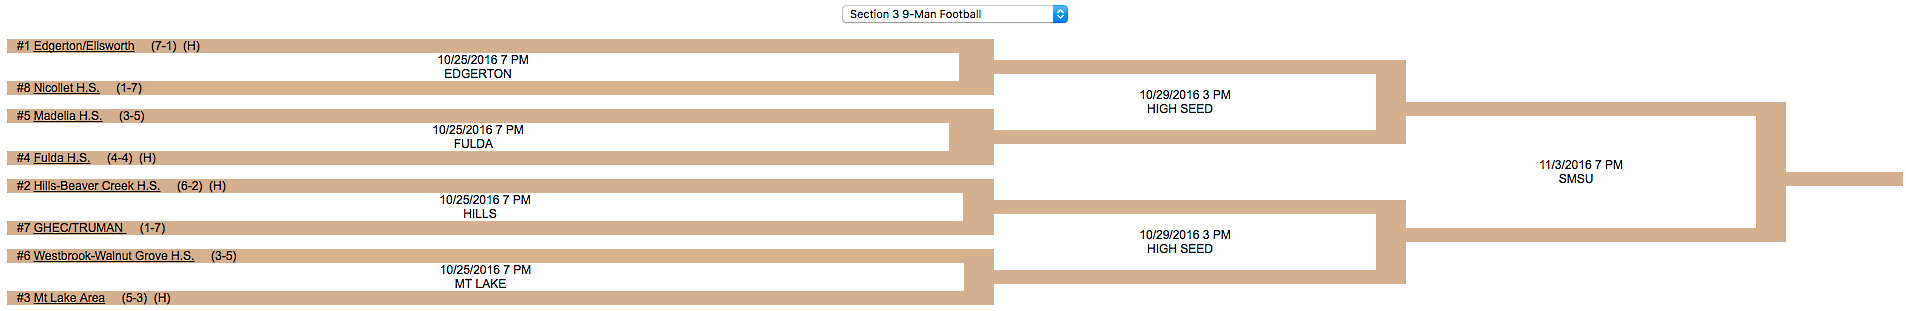 2016-section-football